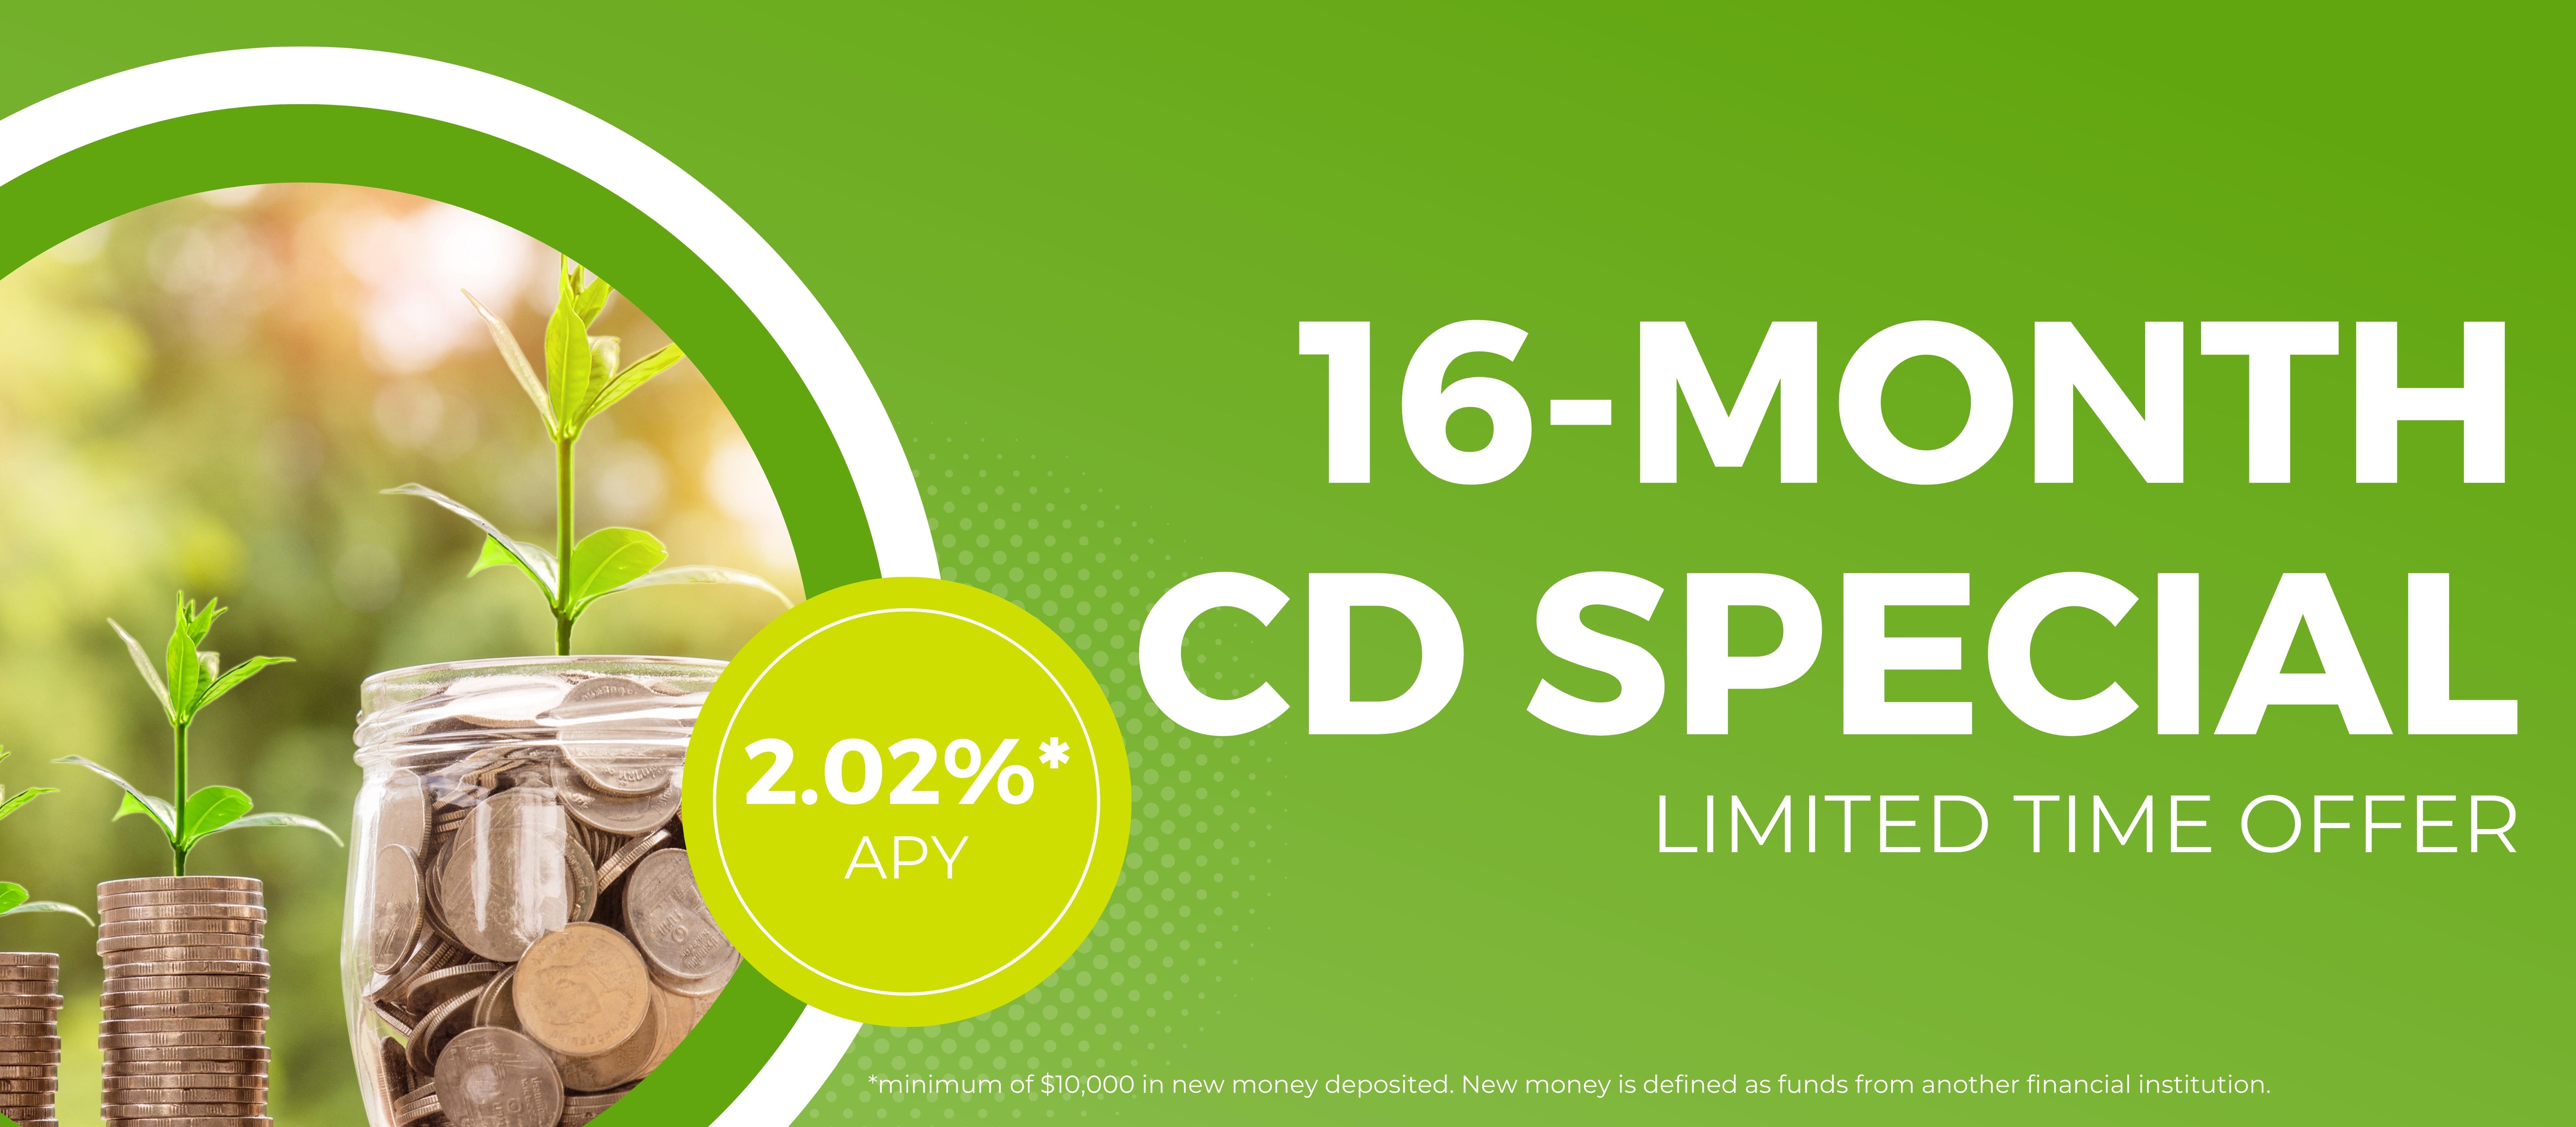 Limited Time 16-Month CD Special - take advantage of 2.02% APY